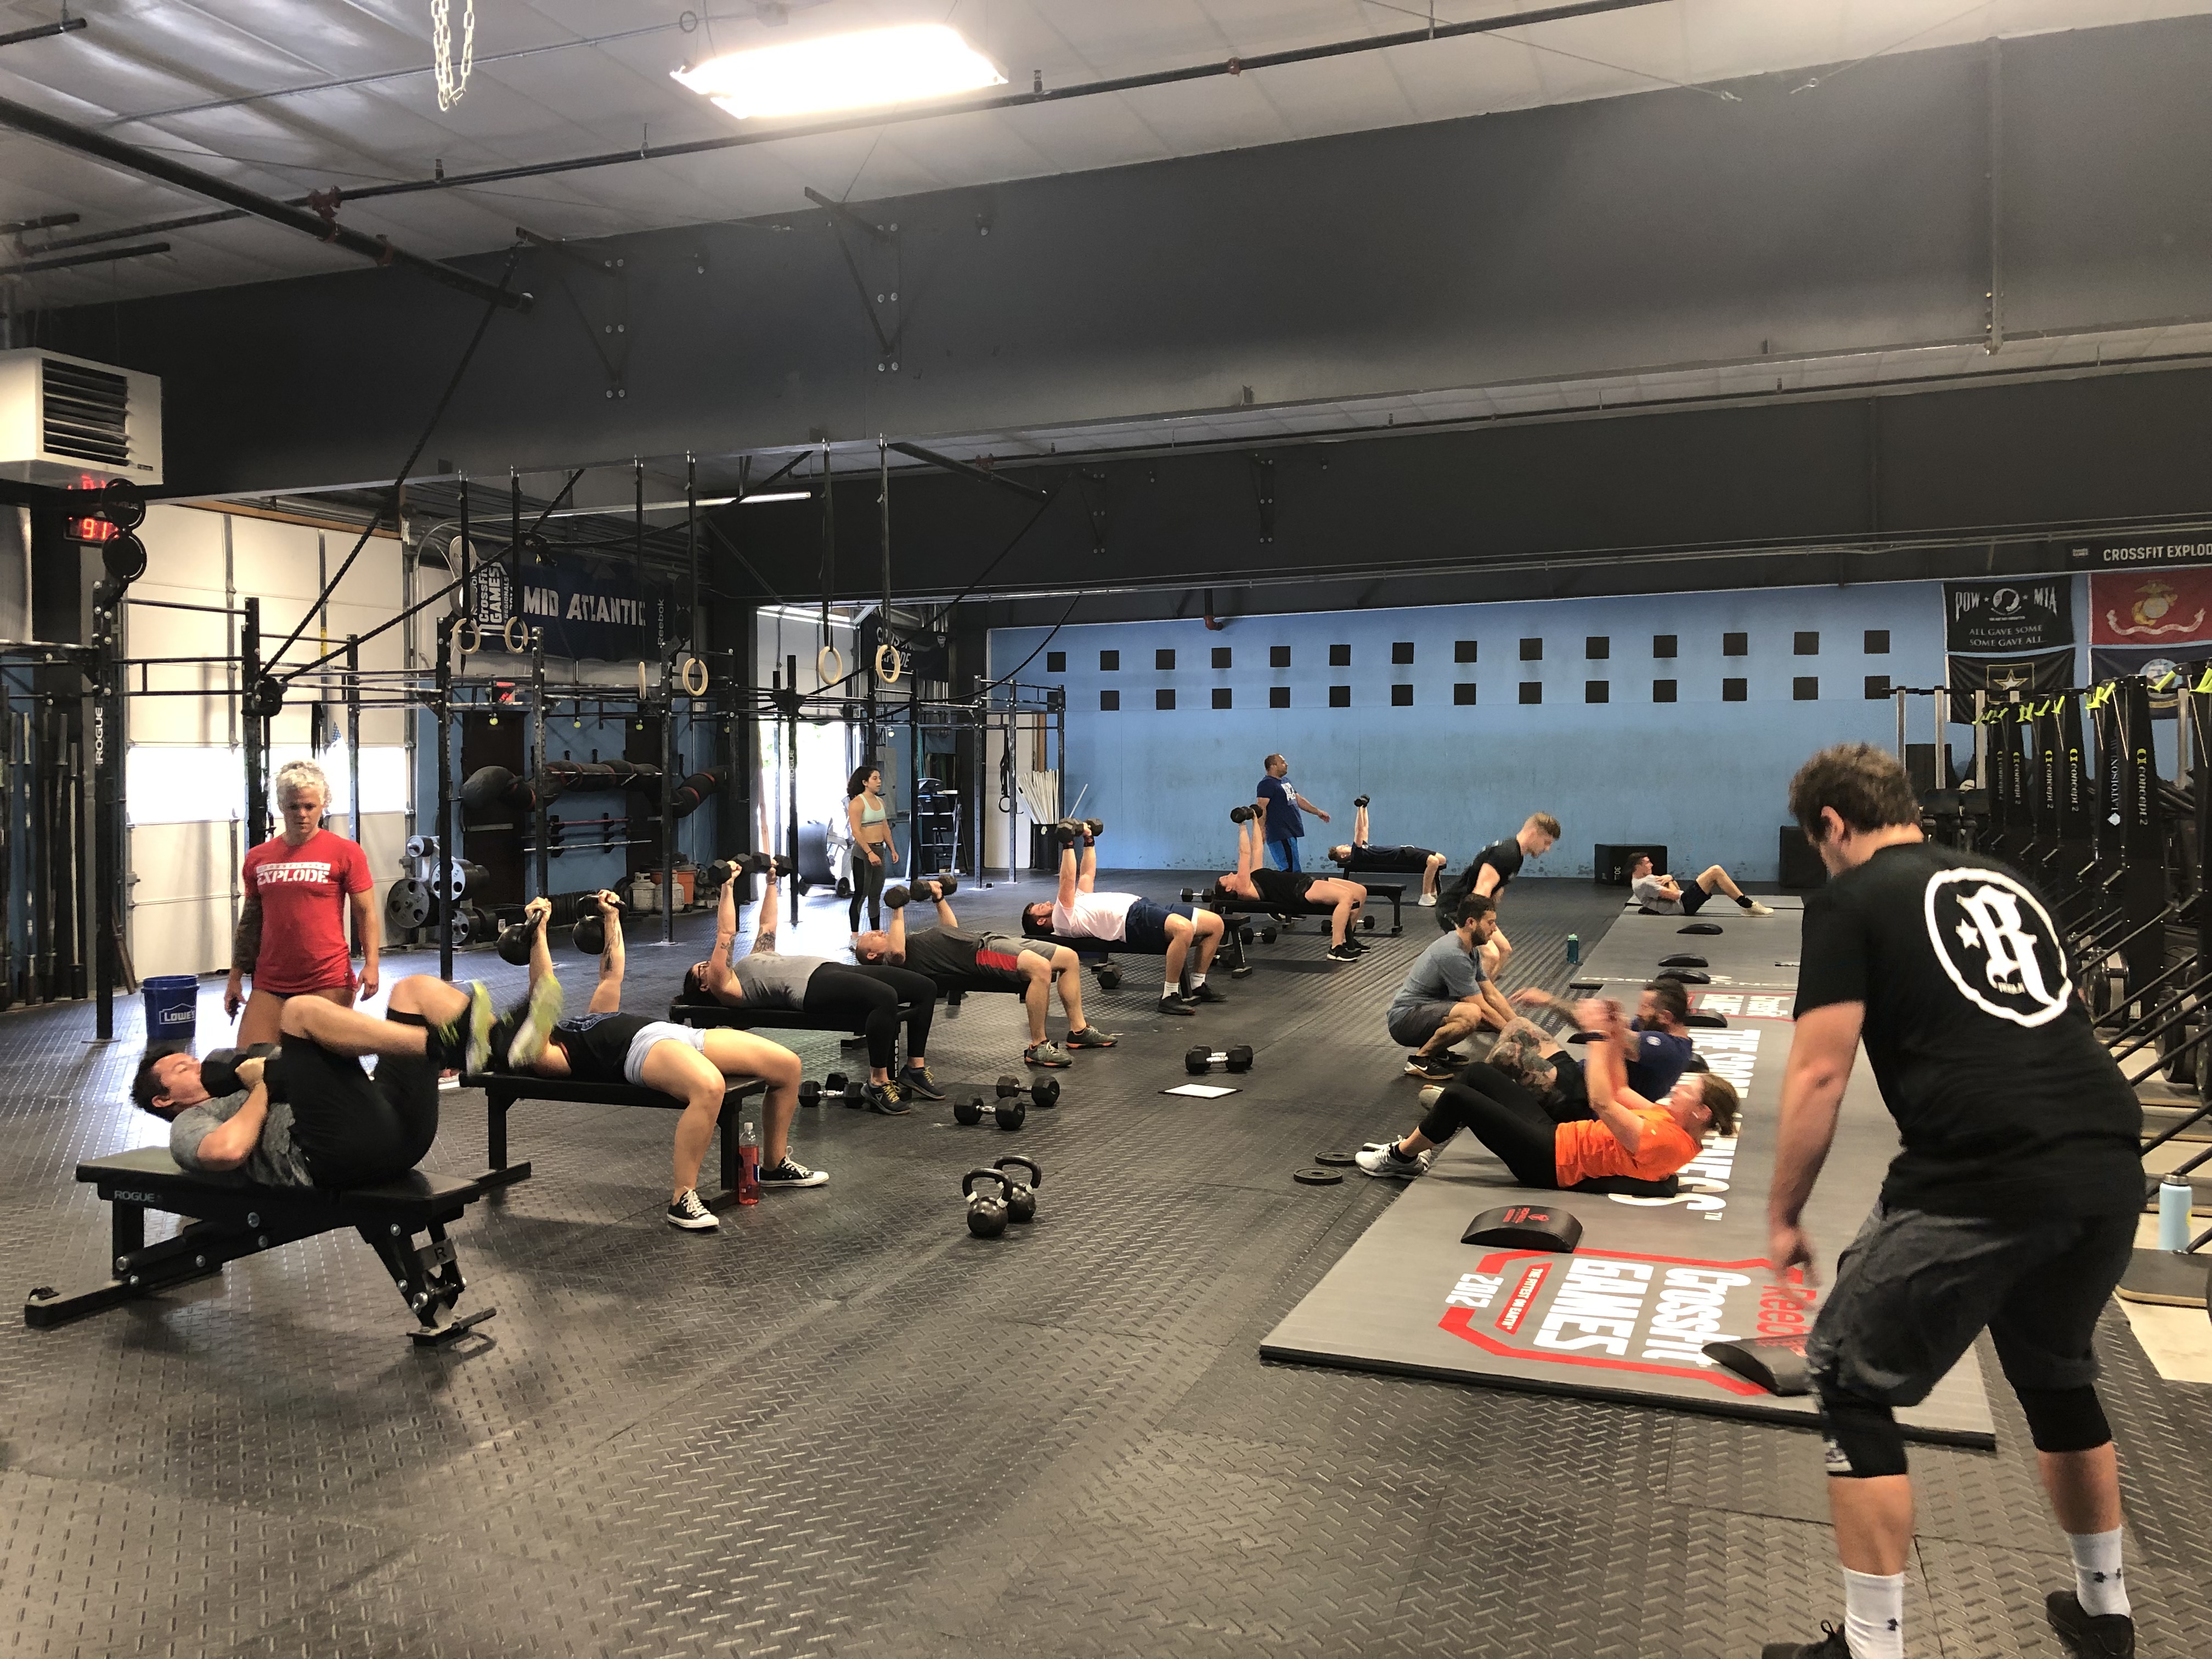 7.7.19 SUNDAY “PACE CAR” – CrossFit Explode